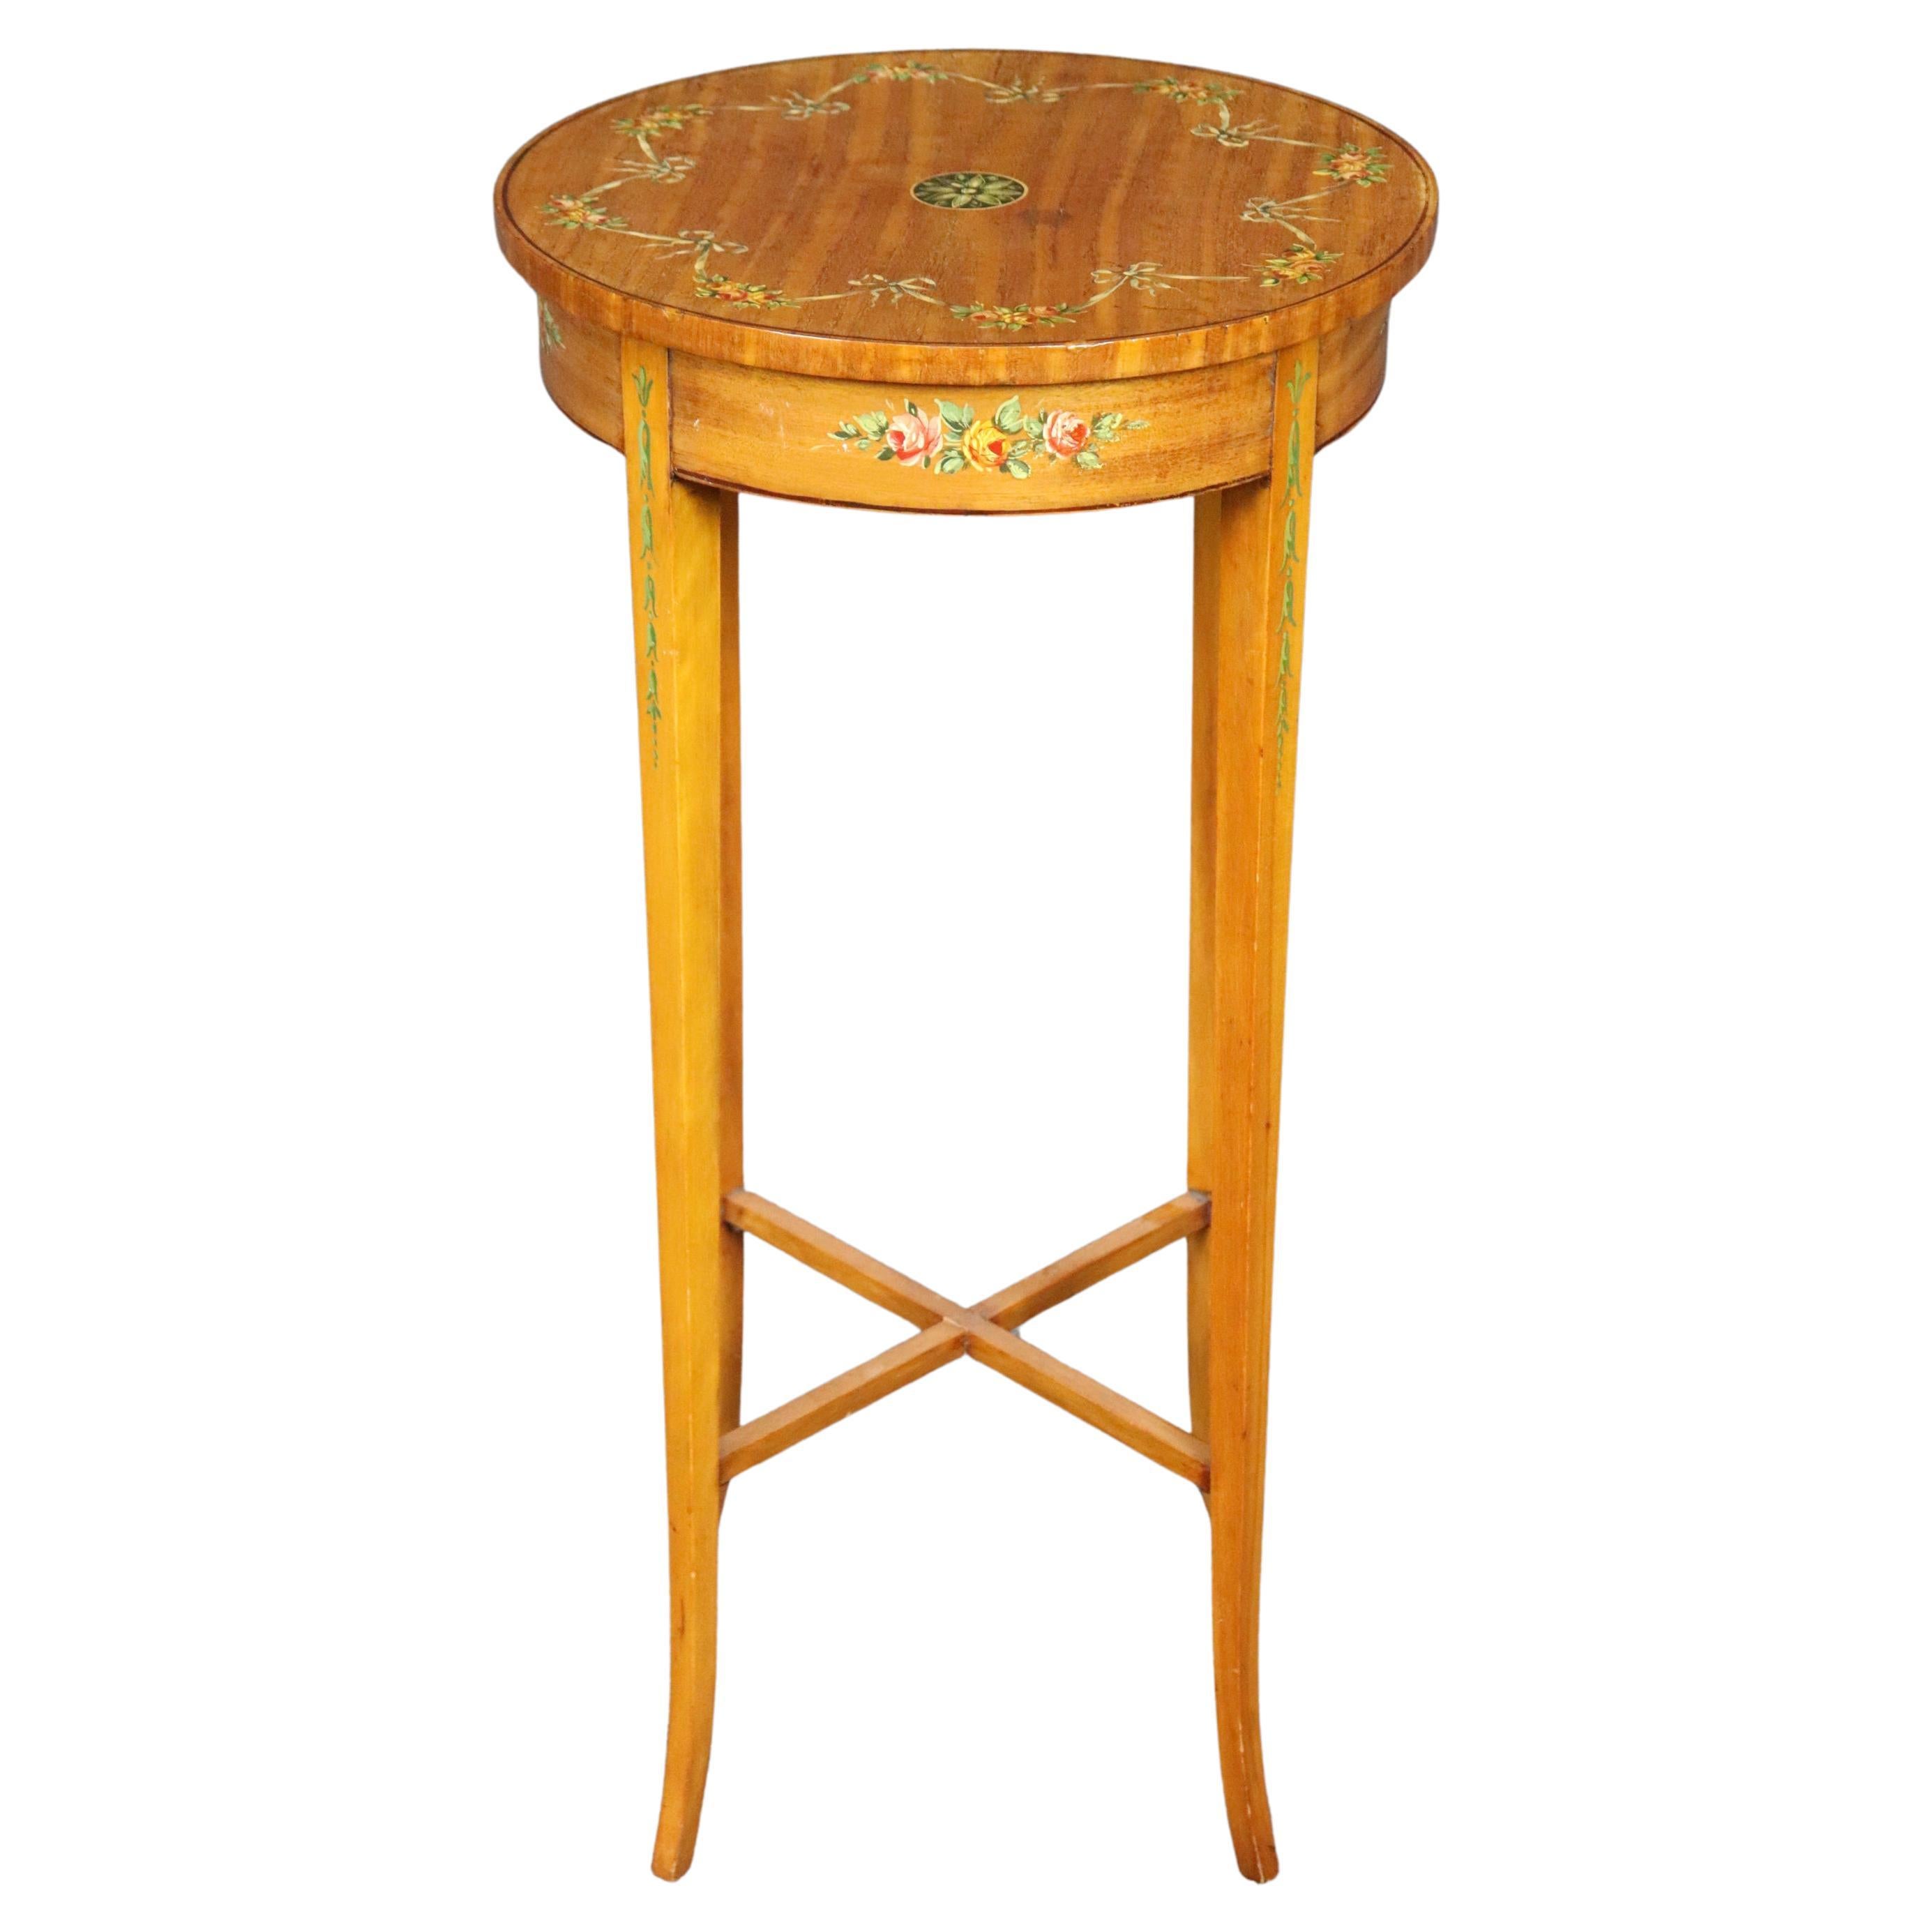 Petite Antique 19th Century English Adams Style Accent Table By Gillow & Co For Sale